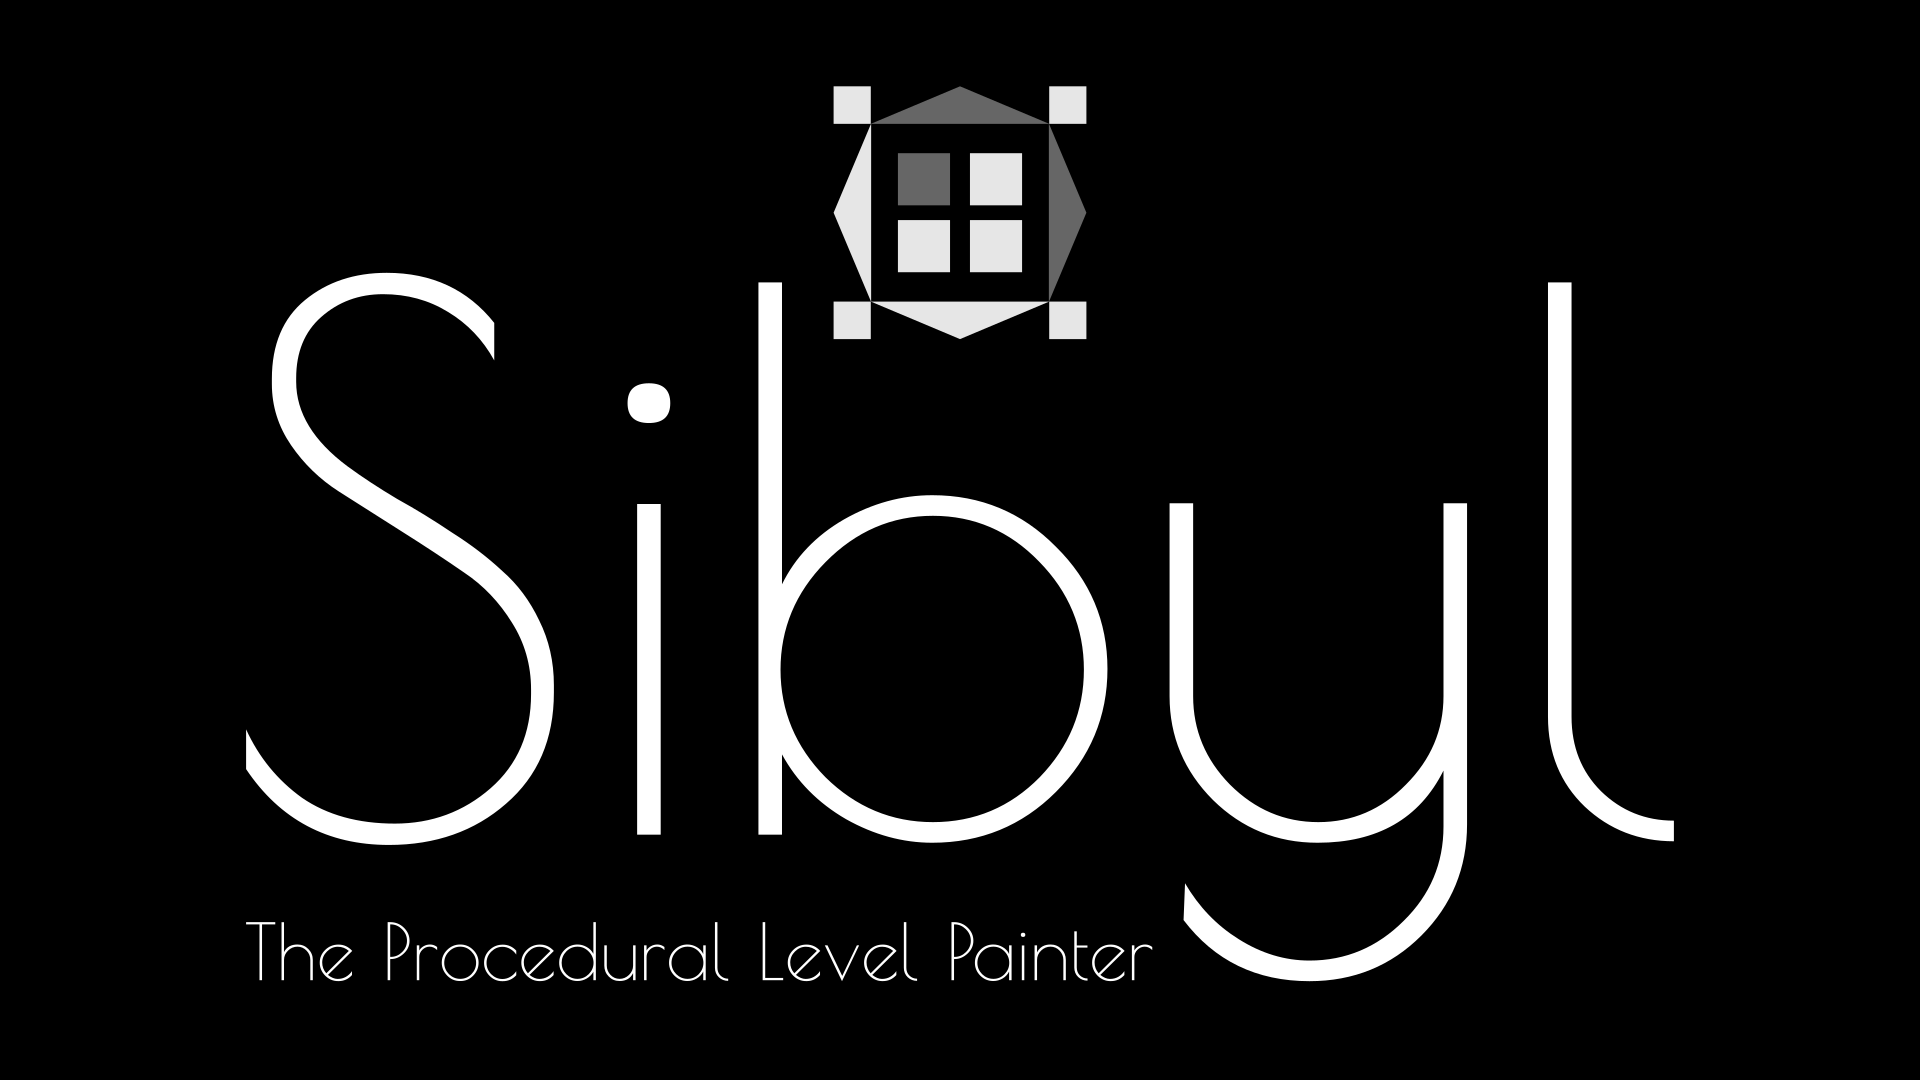 Sibyl - The Procedural Level Painter